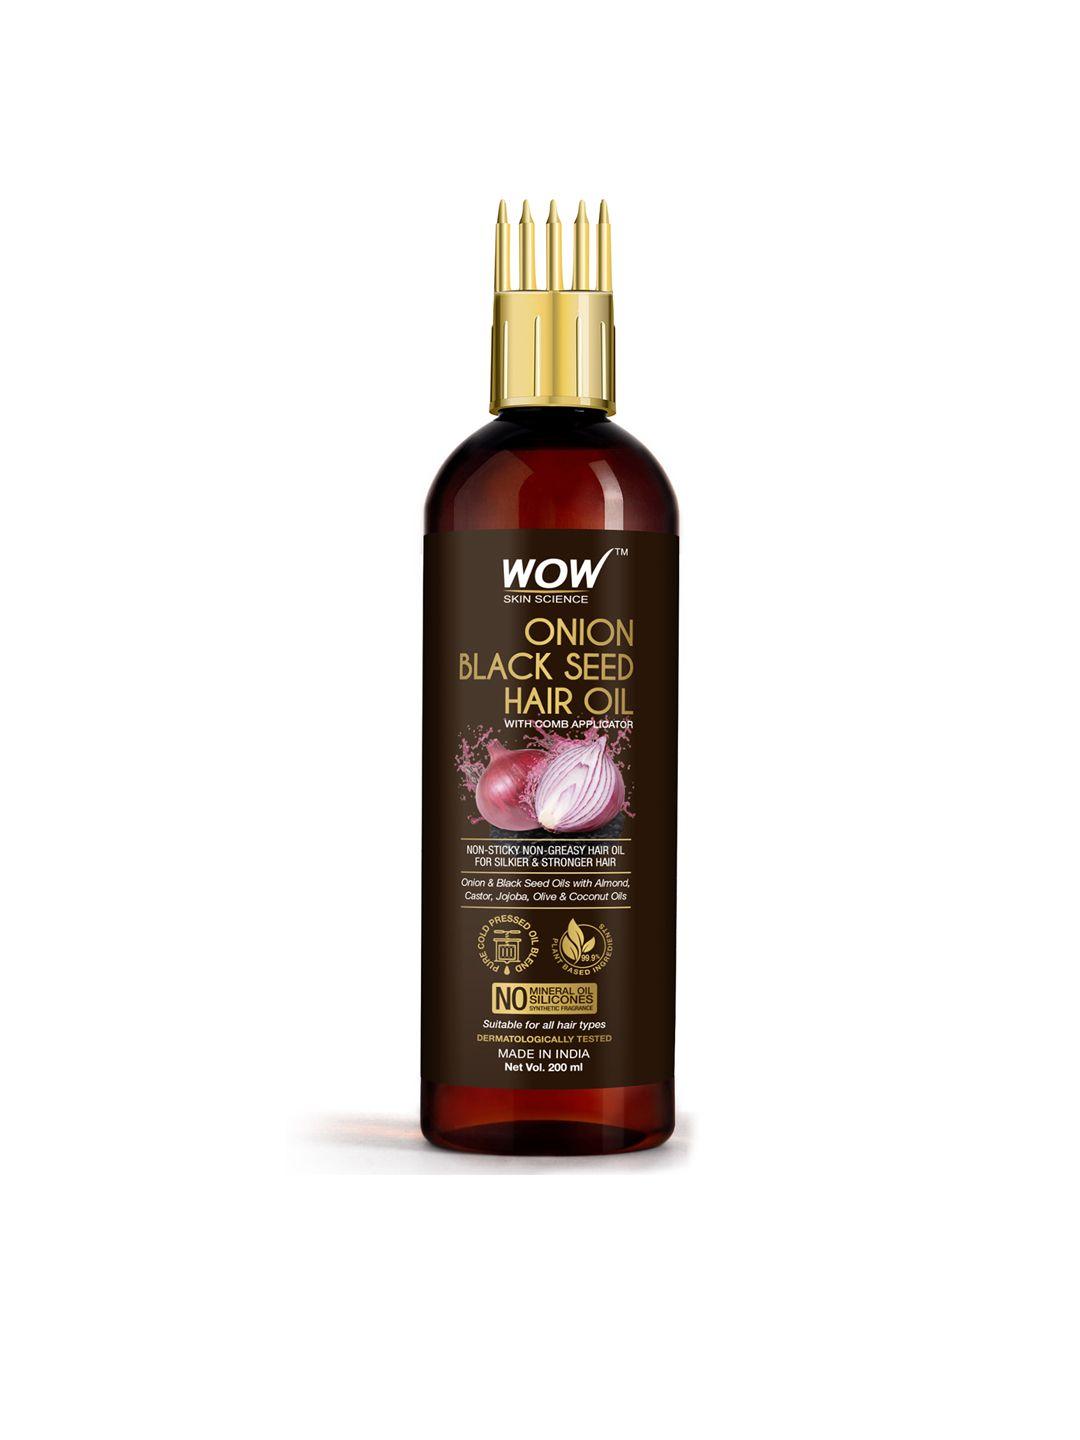 wow skin science onion hair oil with black seed oil extracts with comb applicator - 200 ml